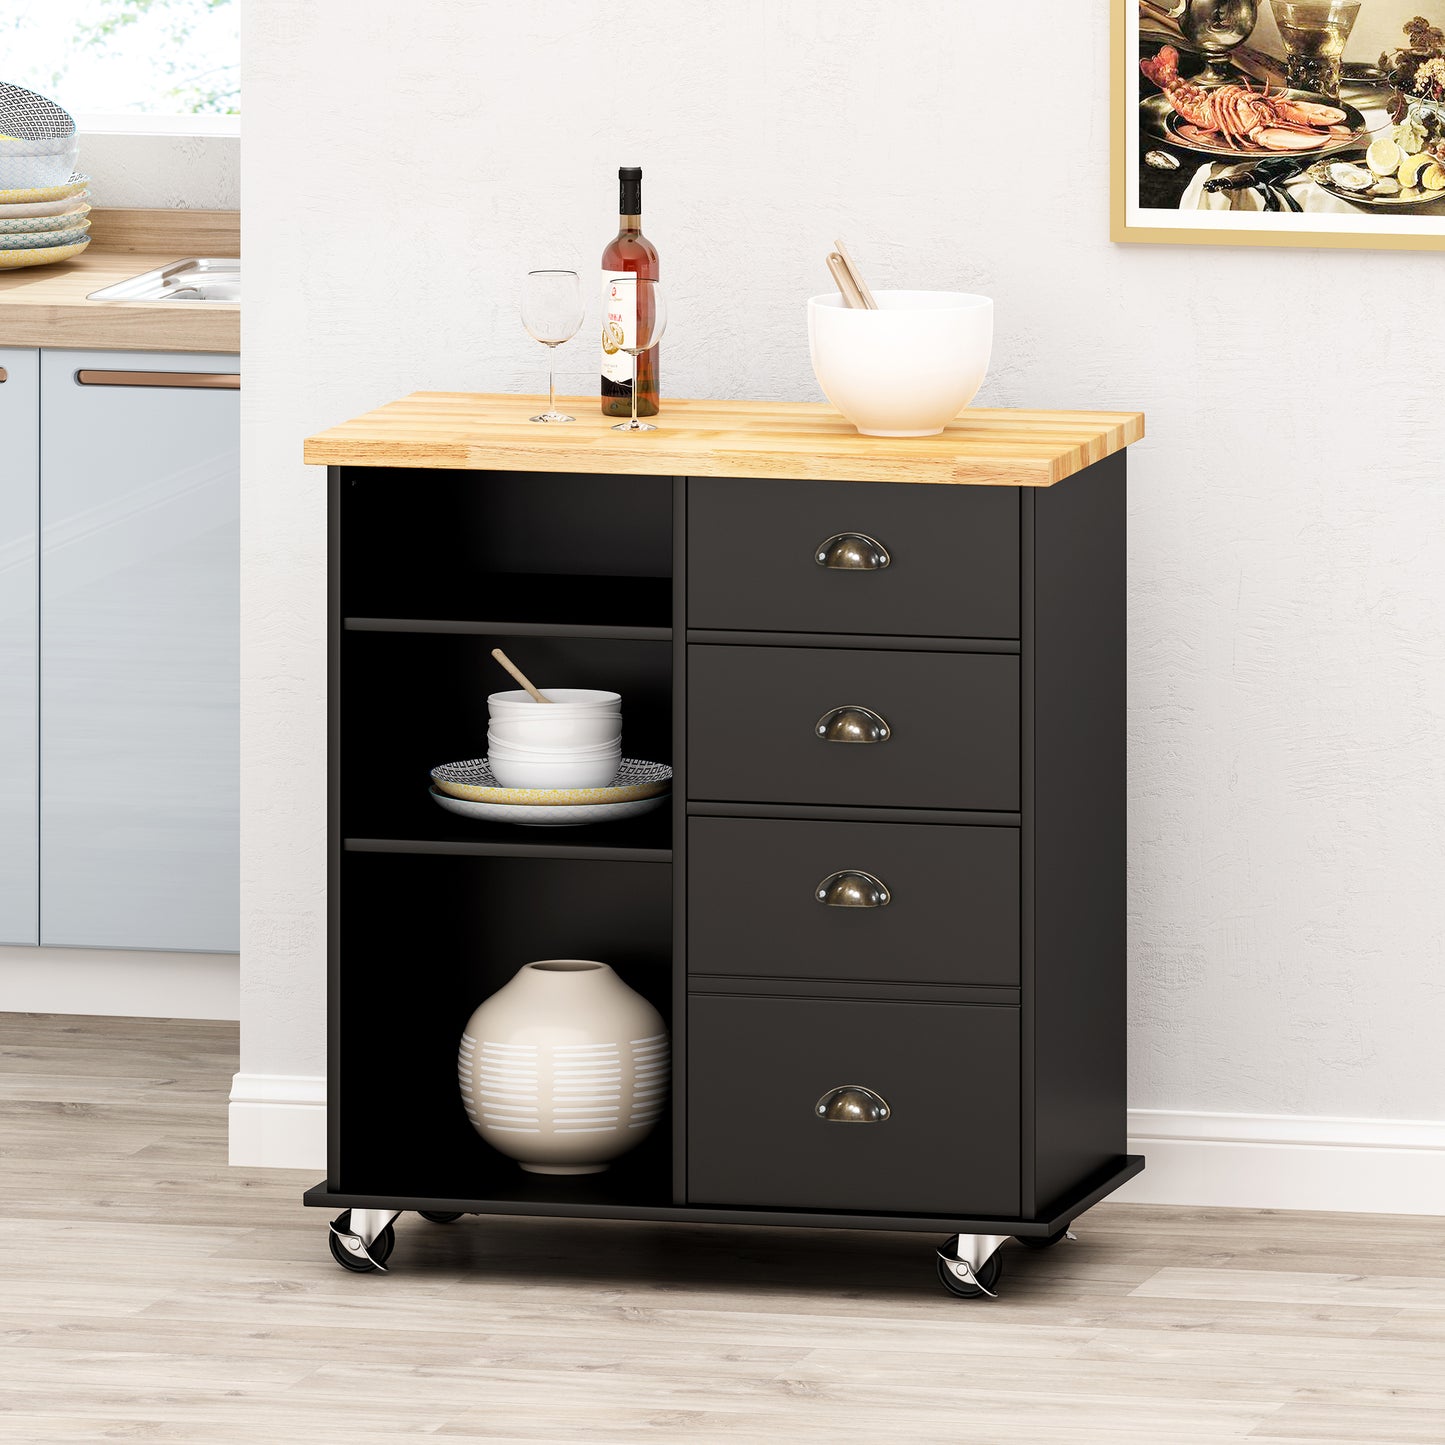 Yohaan Contemporary Kitchen Cart with Wheels